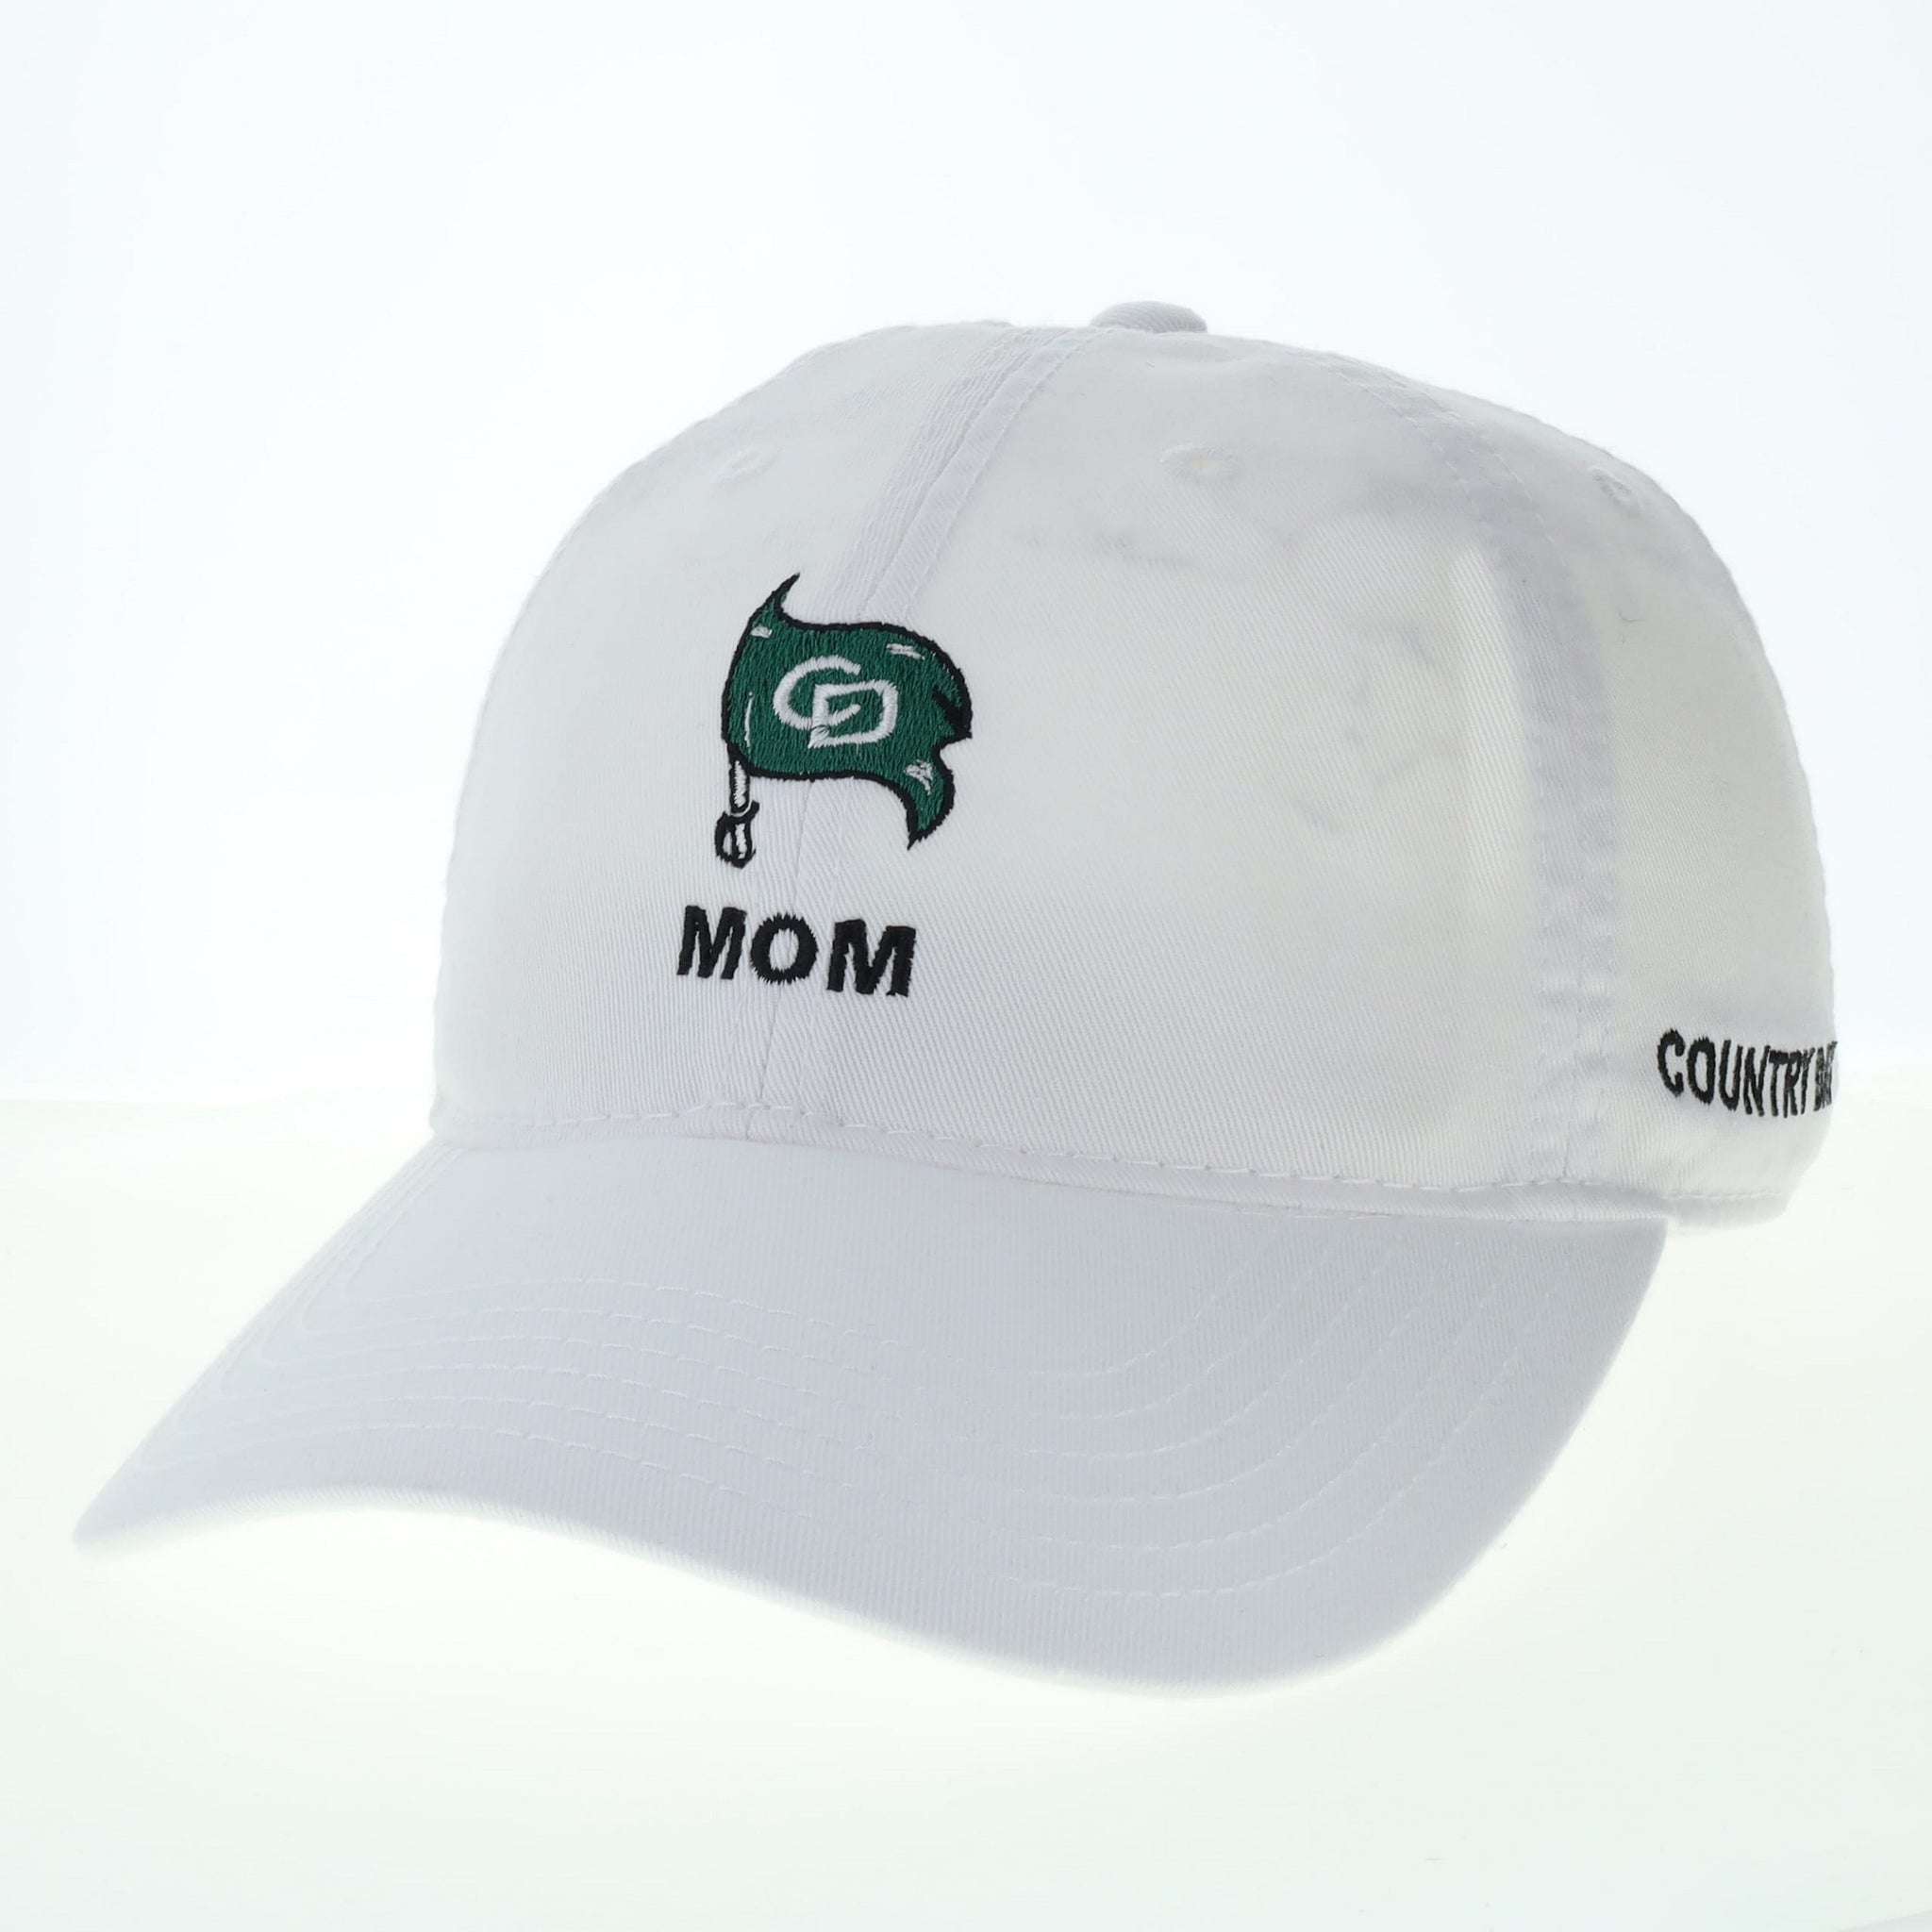 Legacy MOM Relaxed Twill Adjustable Hat